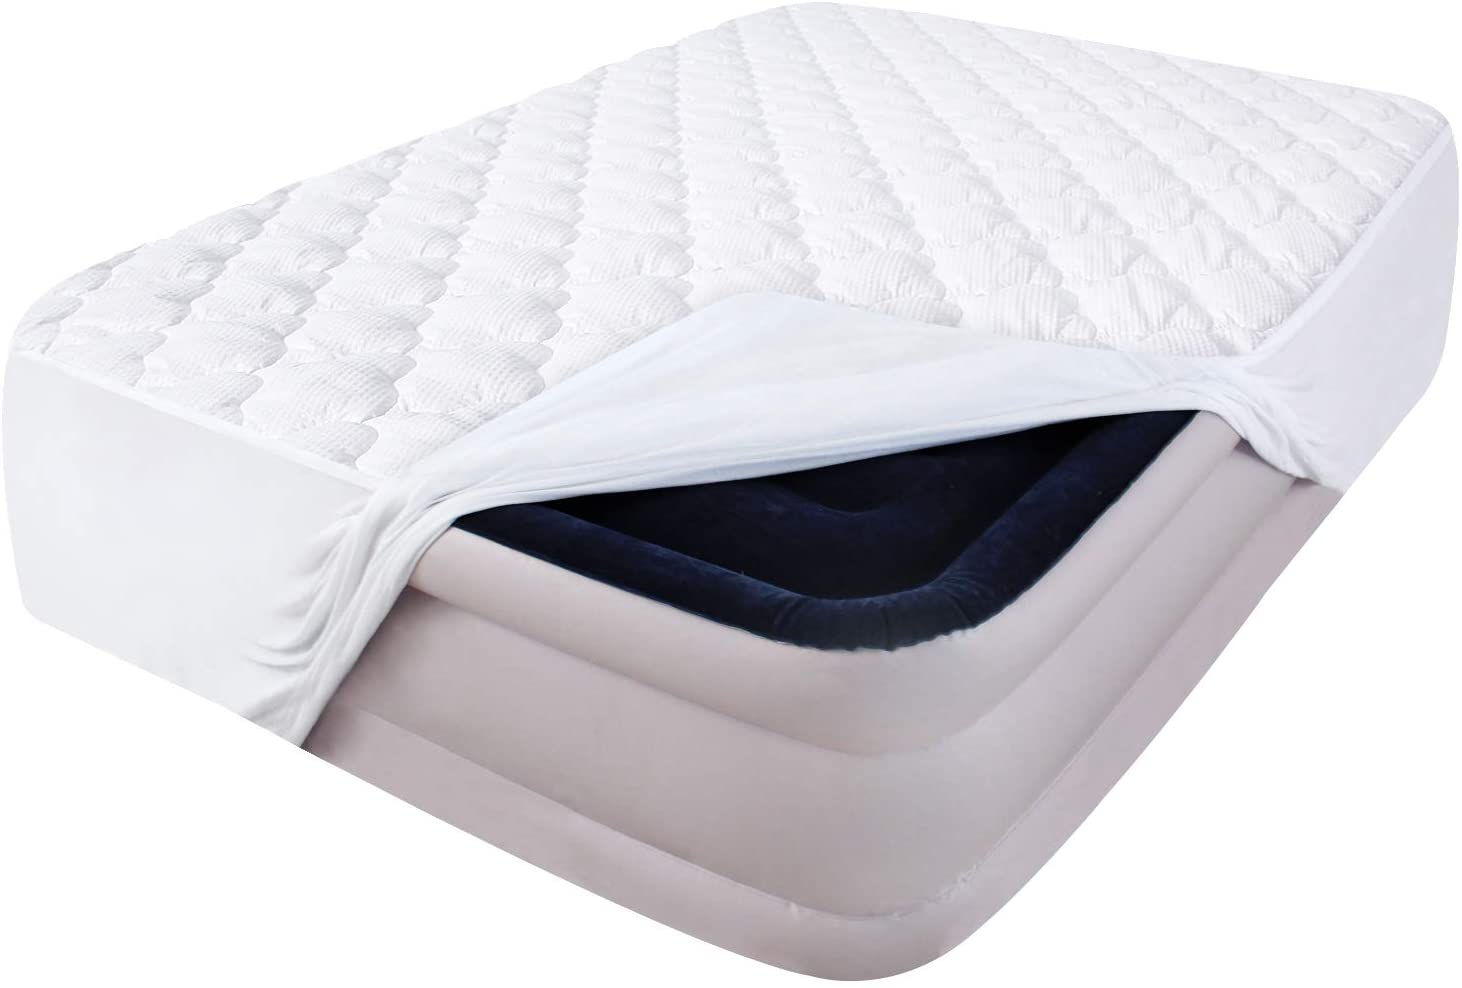 fitted sheets for air mattresses